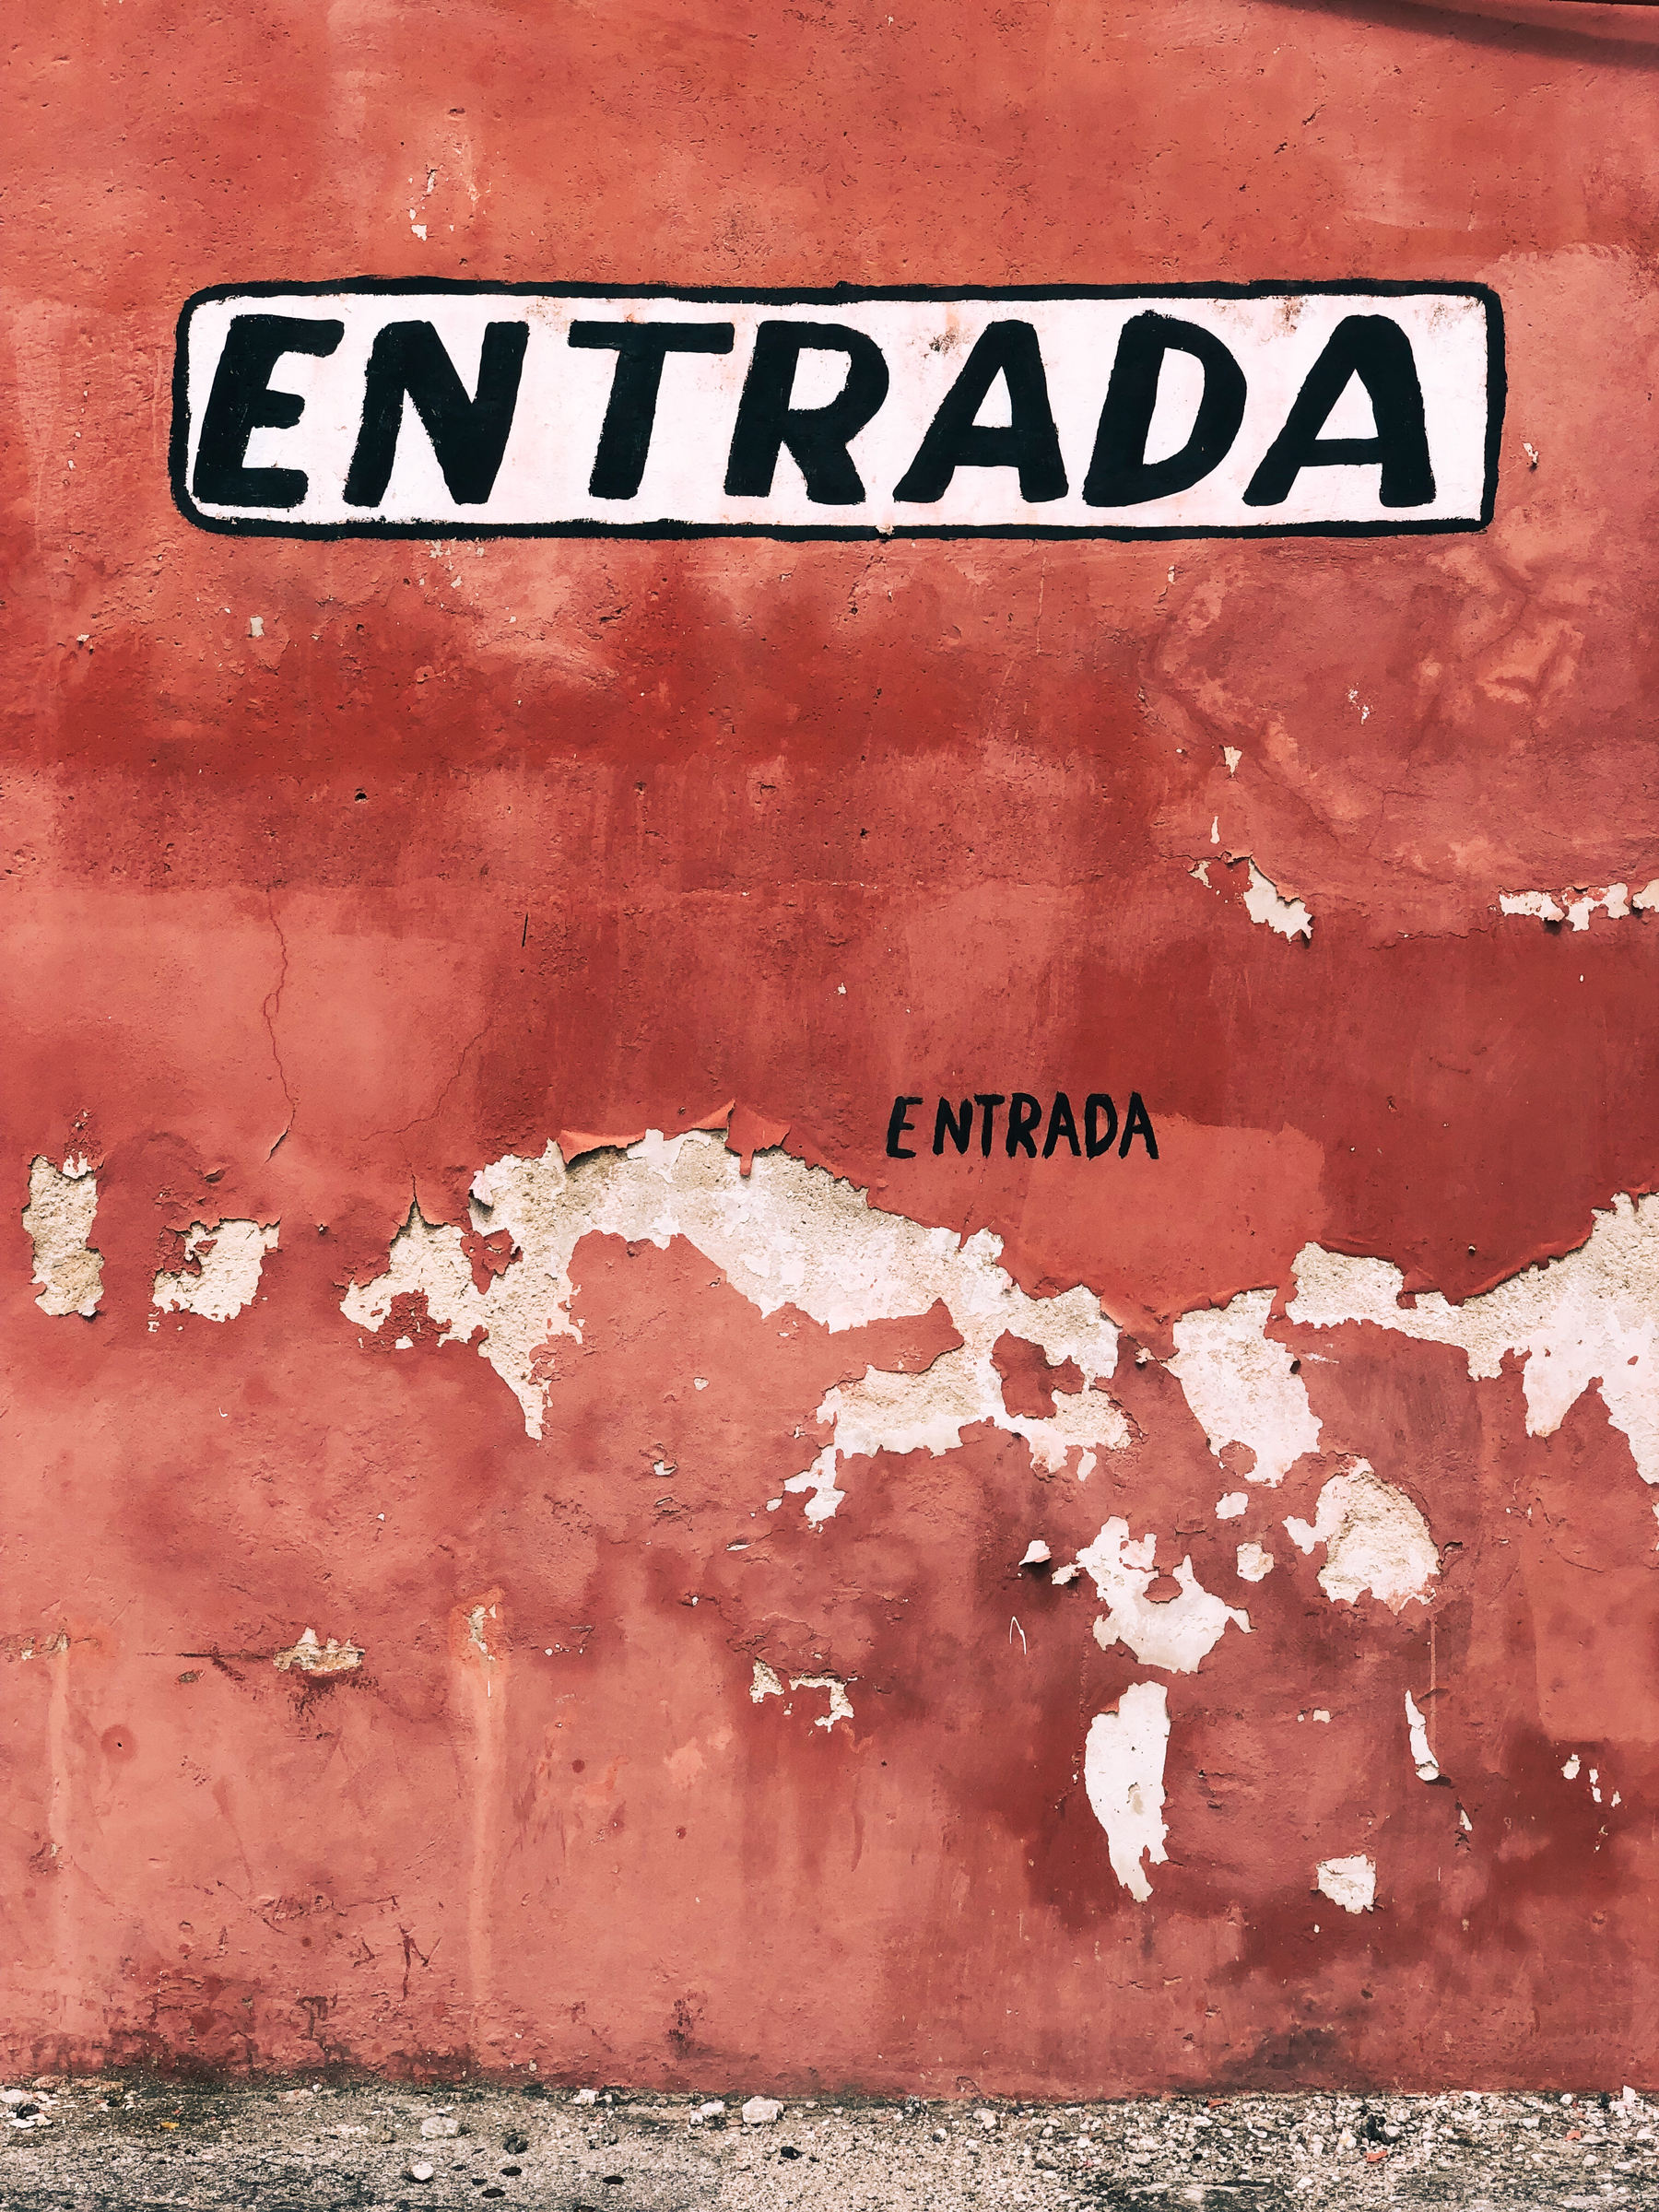 “Entrada” (way in) painted, twice, on a wall. 